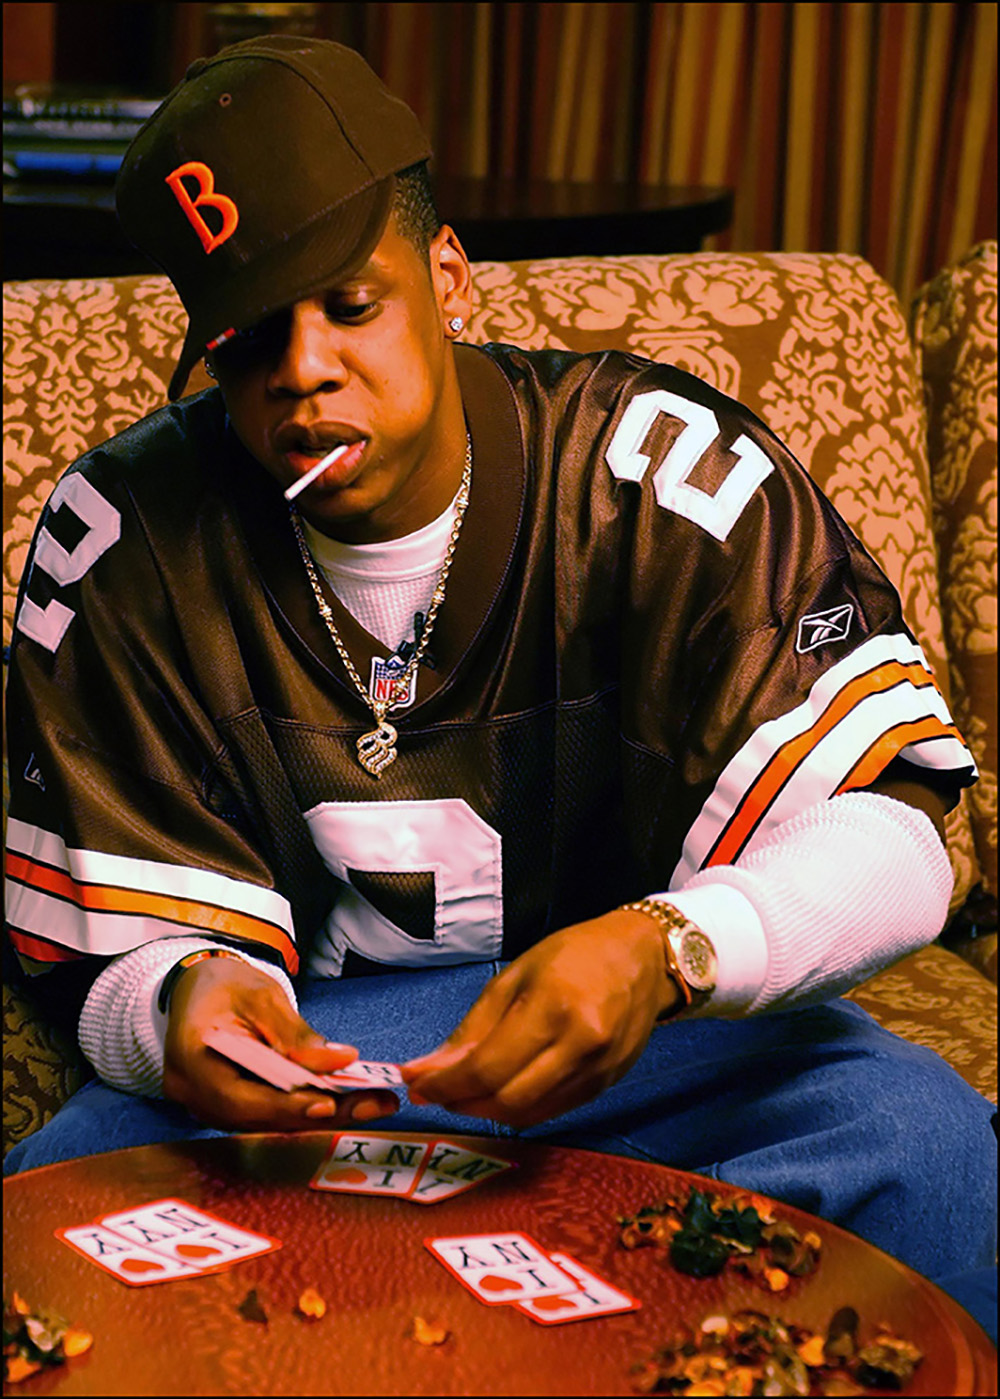 Jay Z plays cards with R Kelly in New York City, 2002